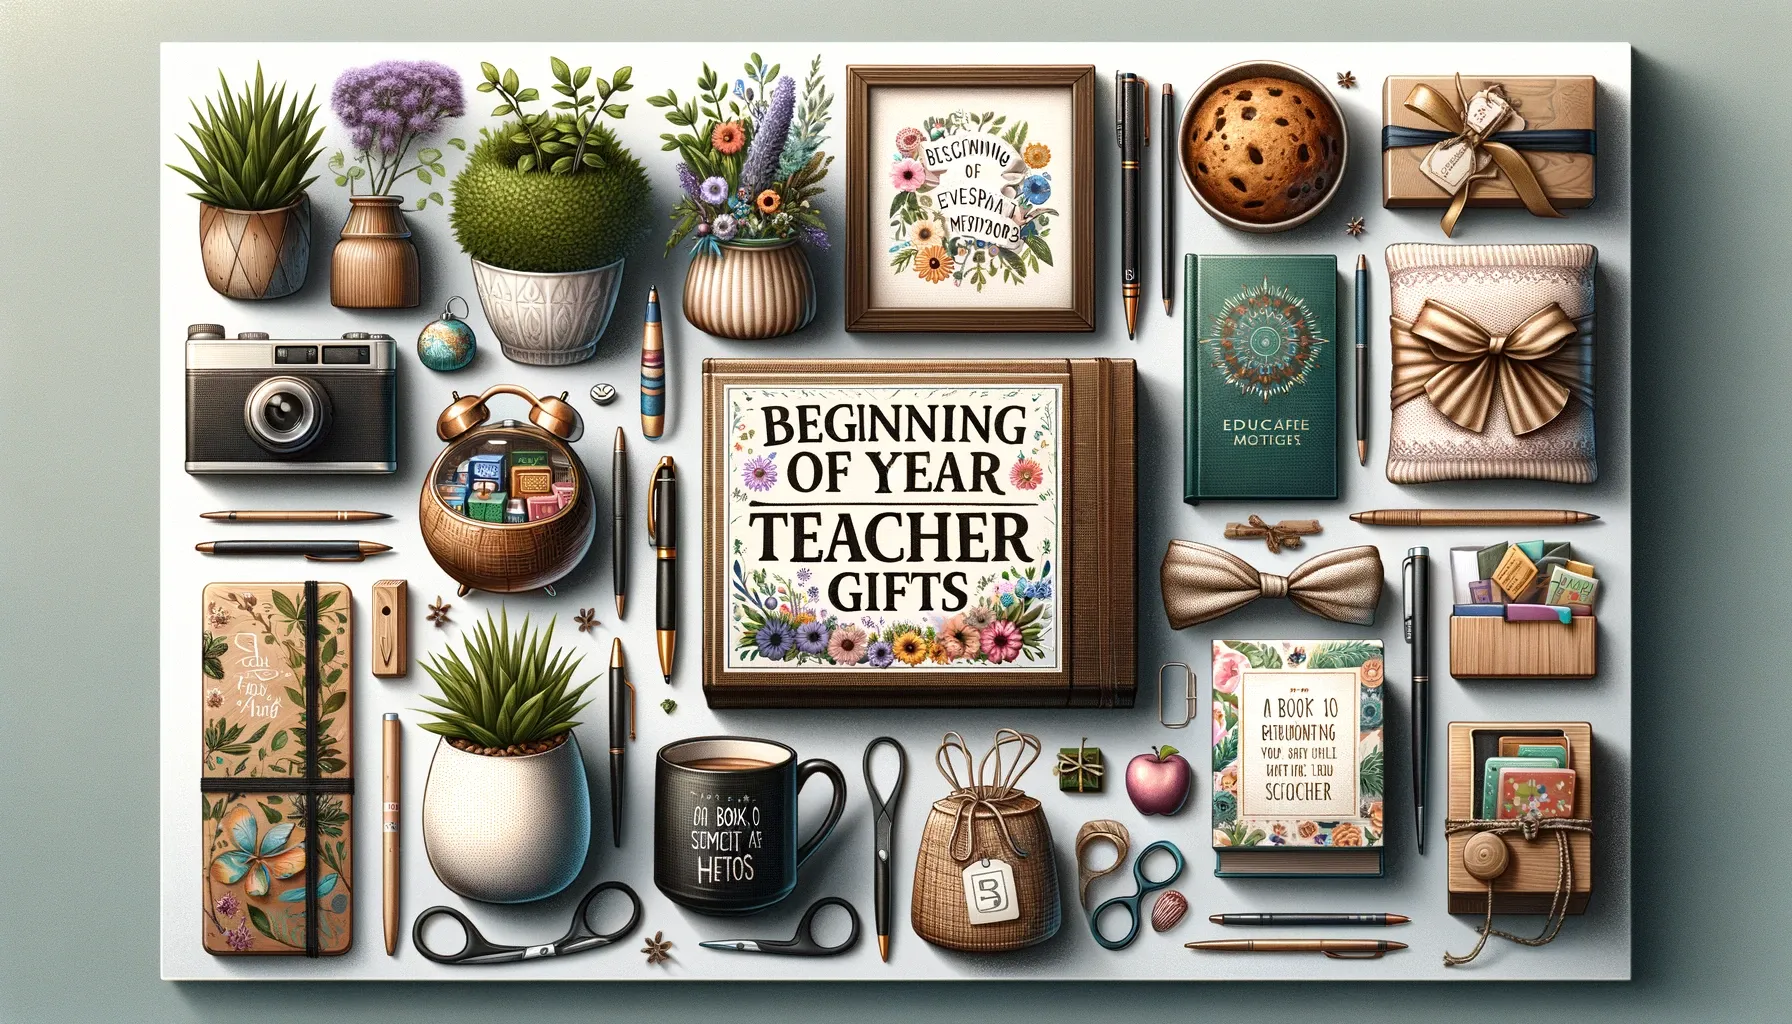 10 Beginning of Year Teacher Gifts That Will Show Your Appreciation